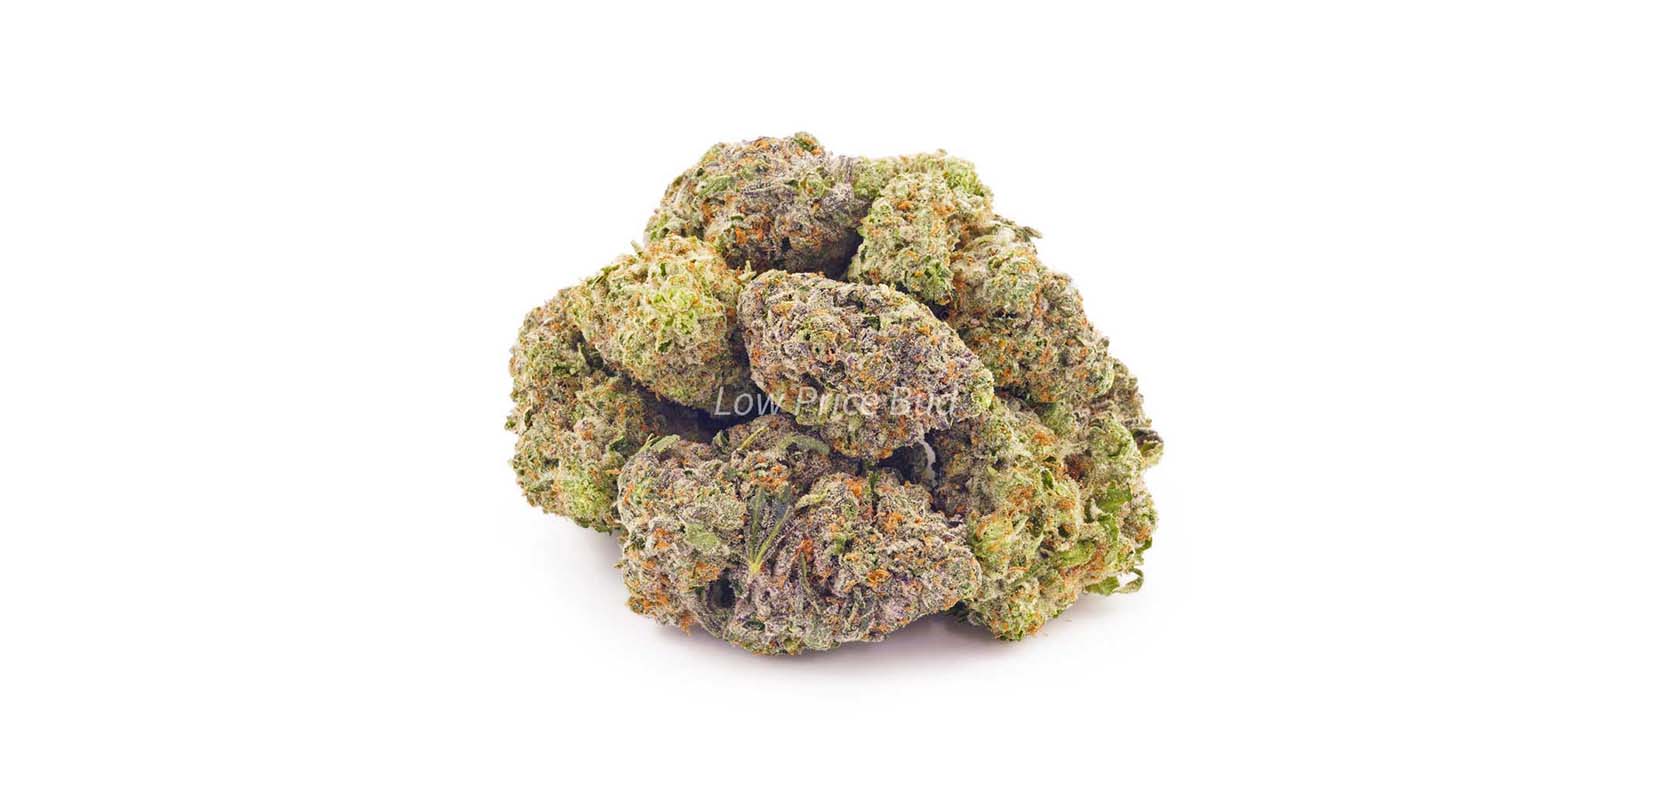 Buy weed Berry Gelato budget buds from Low Price Bud online dispensary Canada. ganjaexpress. moon rock weed. cannabis dispensary. weed stores.